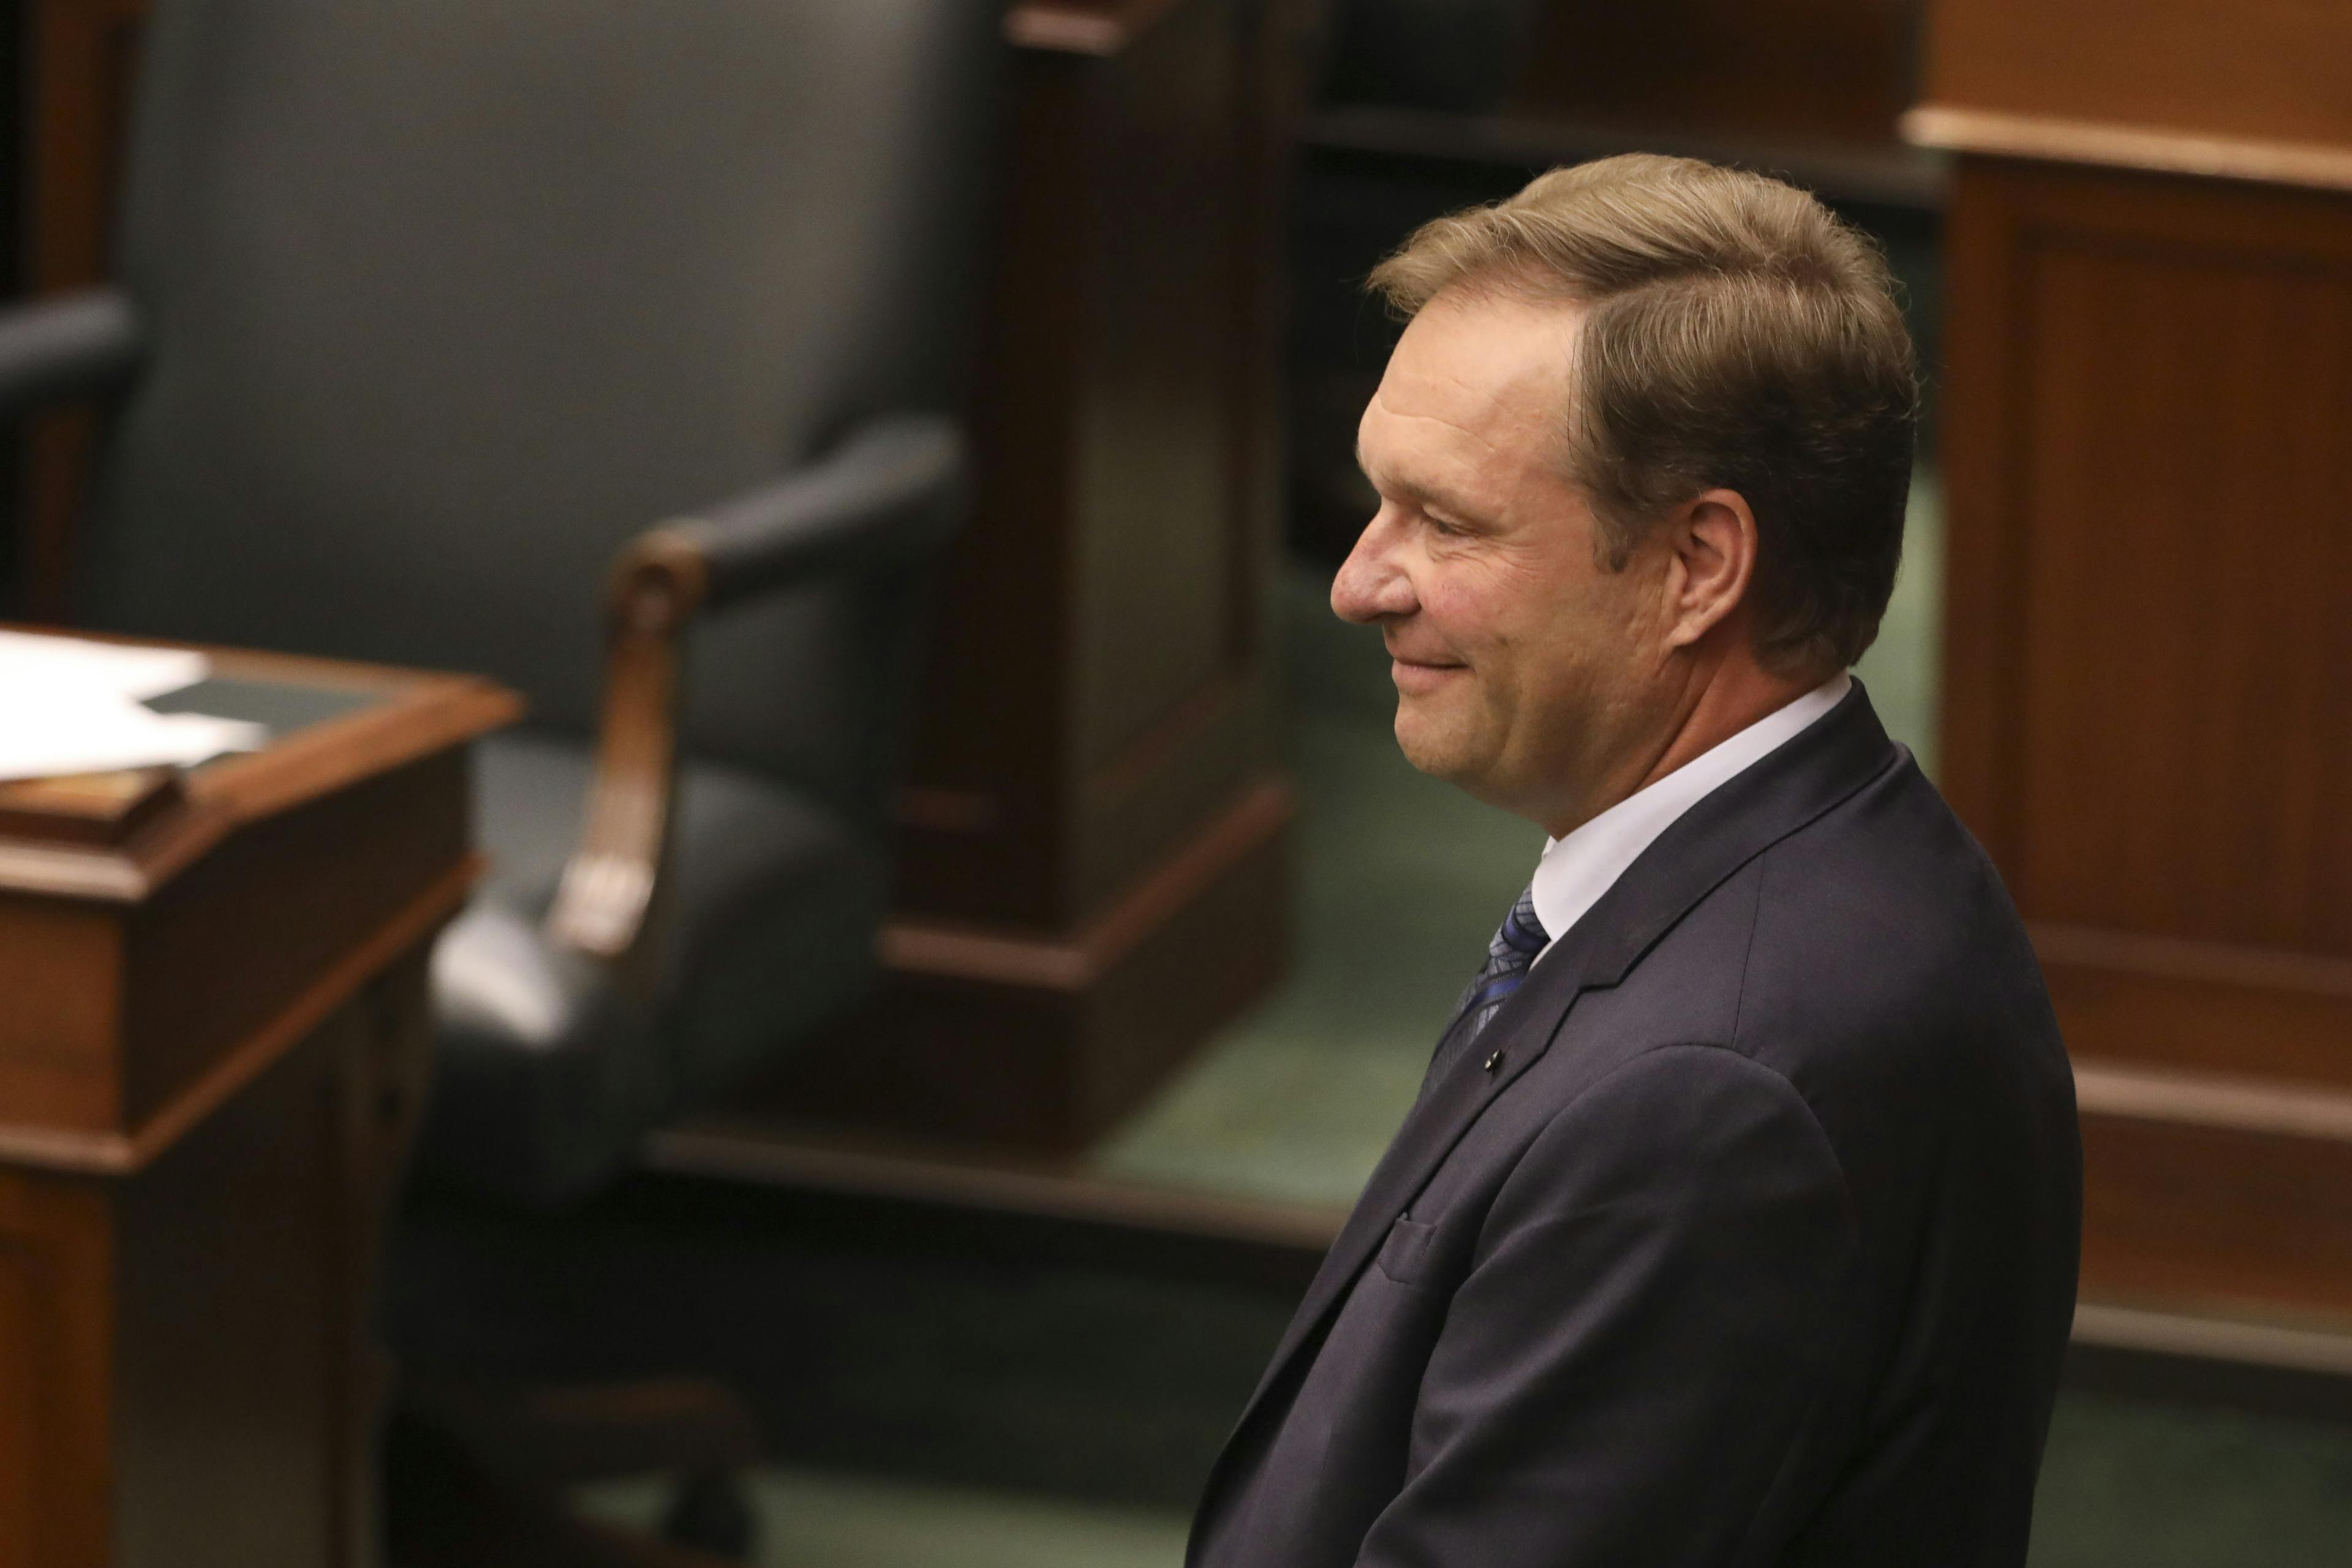 Former Speaker ‘surprised’ to hear house leader publicly support rookie candidate